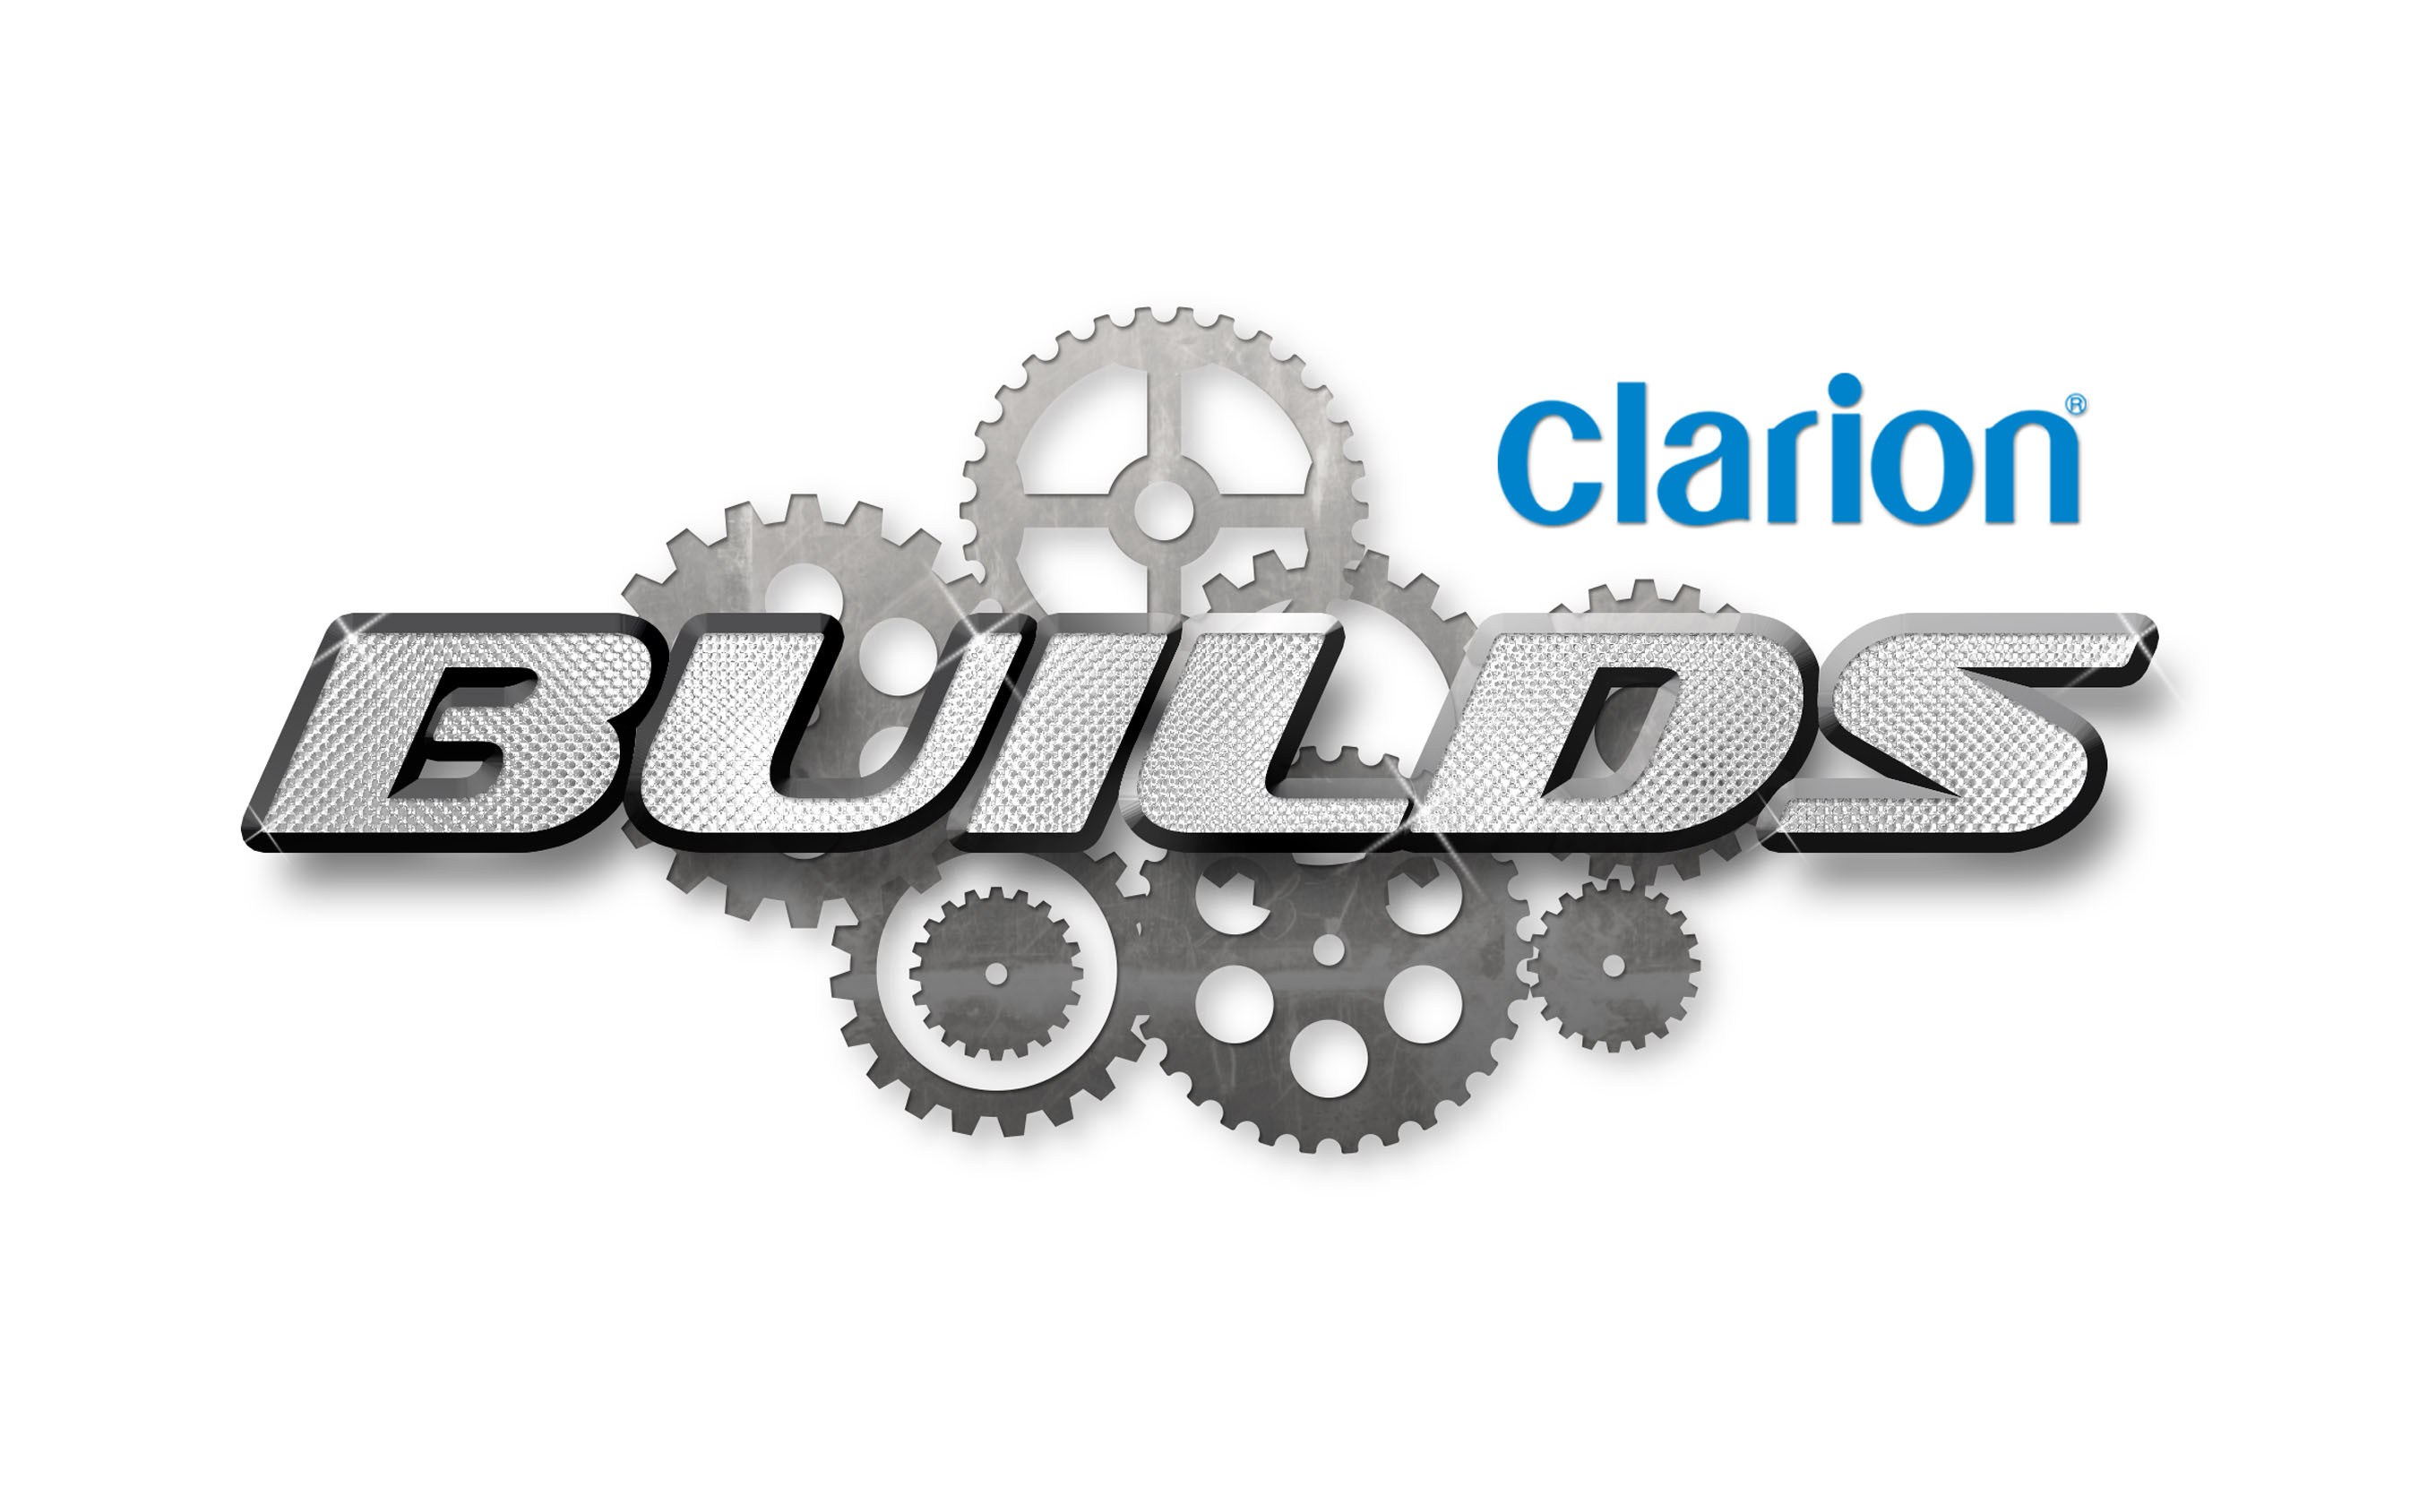 Clarion Builds is an innovative marketing program initiated by Clarion Corporation of America to tackle unique restoration projects of iconic cars and trucks in cooperation with key partners hand-selected for each individual project. The program is designed to connect with new and existing fans who are car enthusiasts, automotive sports fans, journalists, historians, and anyone with an interest in design and style, through a mix of social and traditional media.  http://www.clarionbuilds.com/ . (PRNewsFoto/Clarion Corporation of America) (PRNewsFoto/)